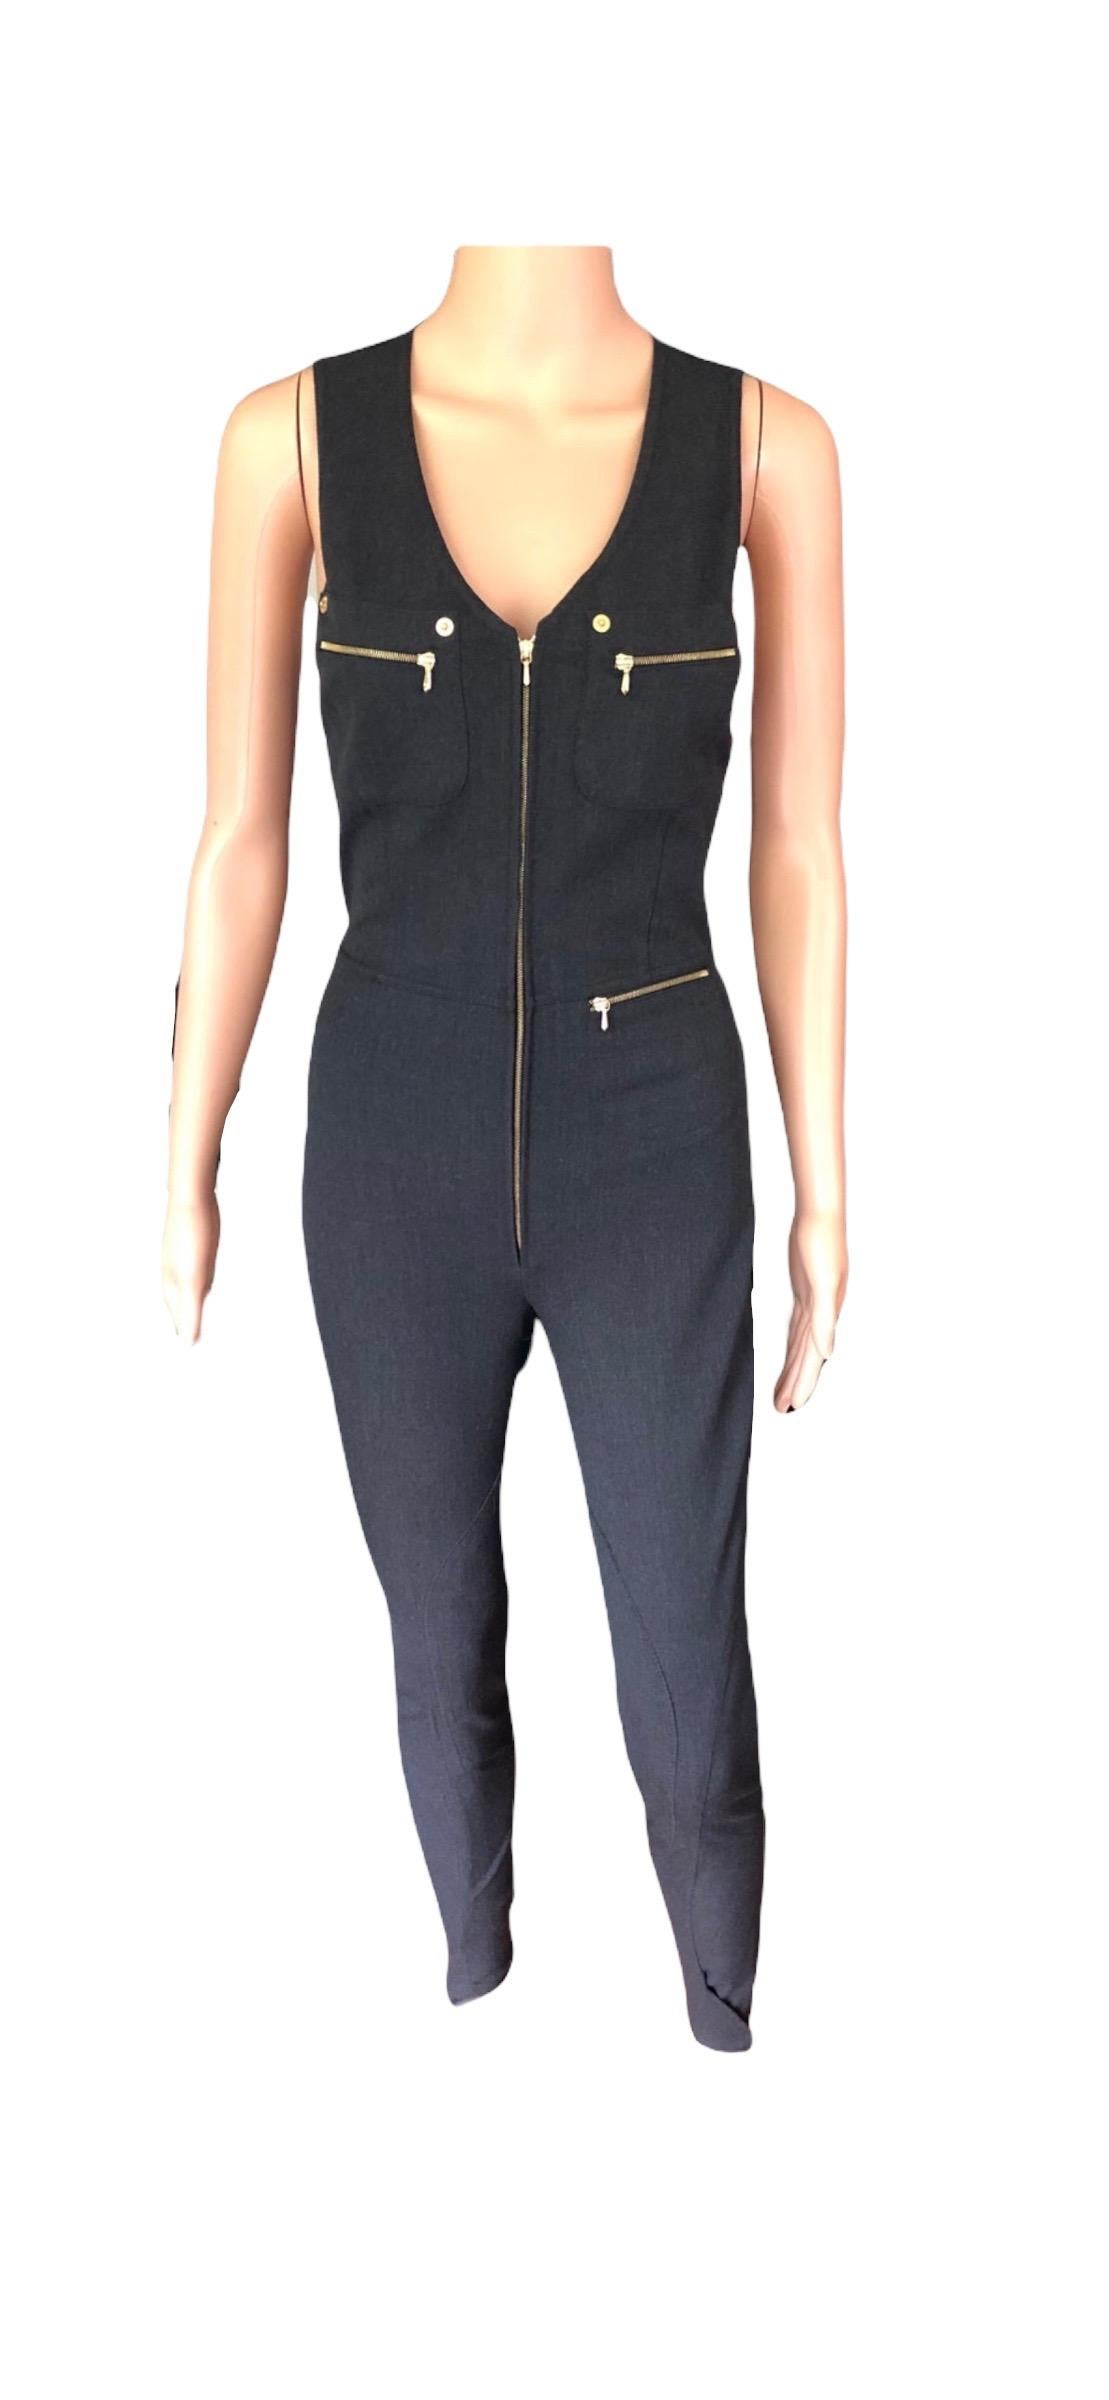 Tom Ford for Gucci S/S 1993 Runway Vintage Zipper Jumpsuit For Sale 2